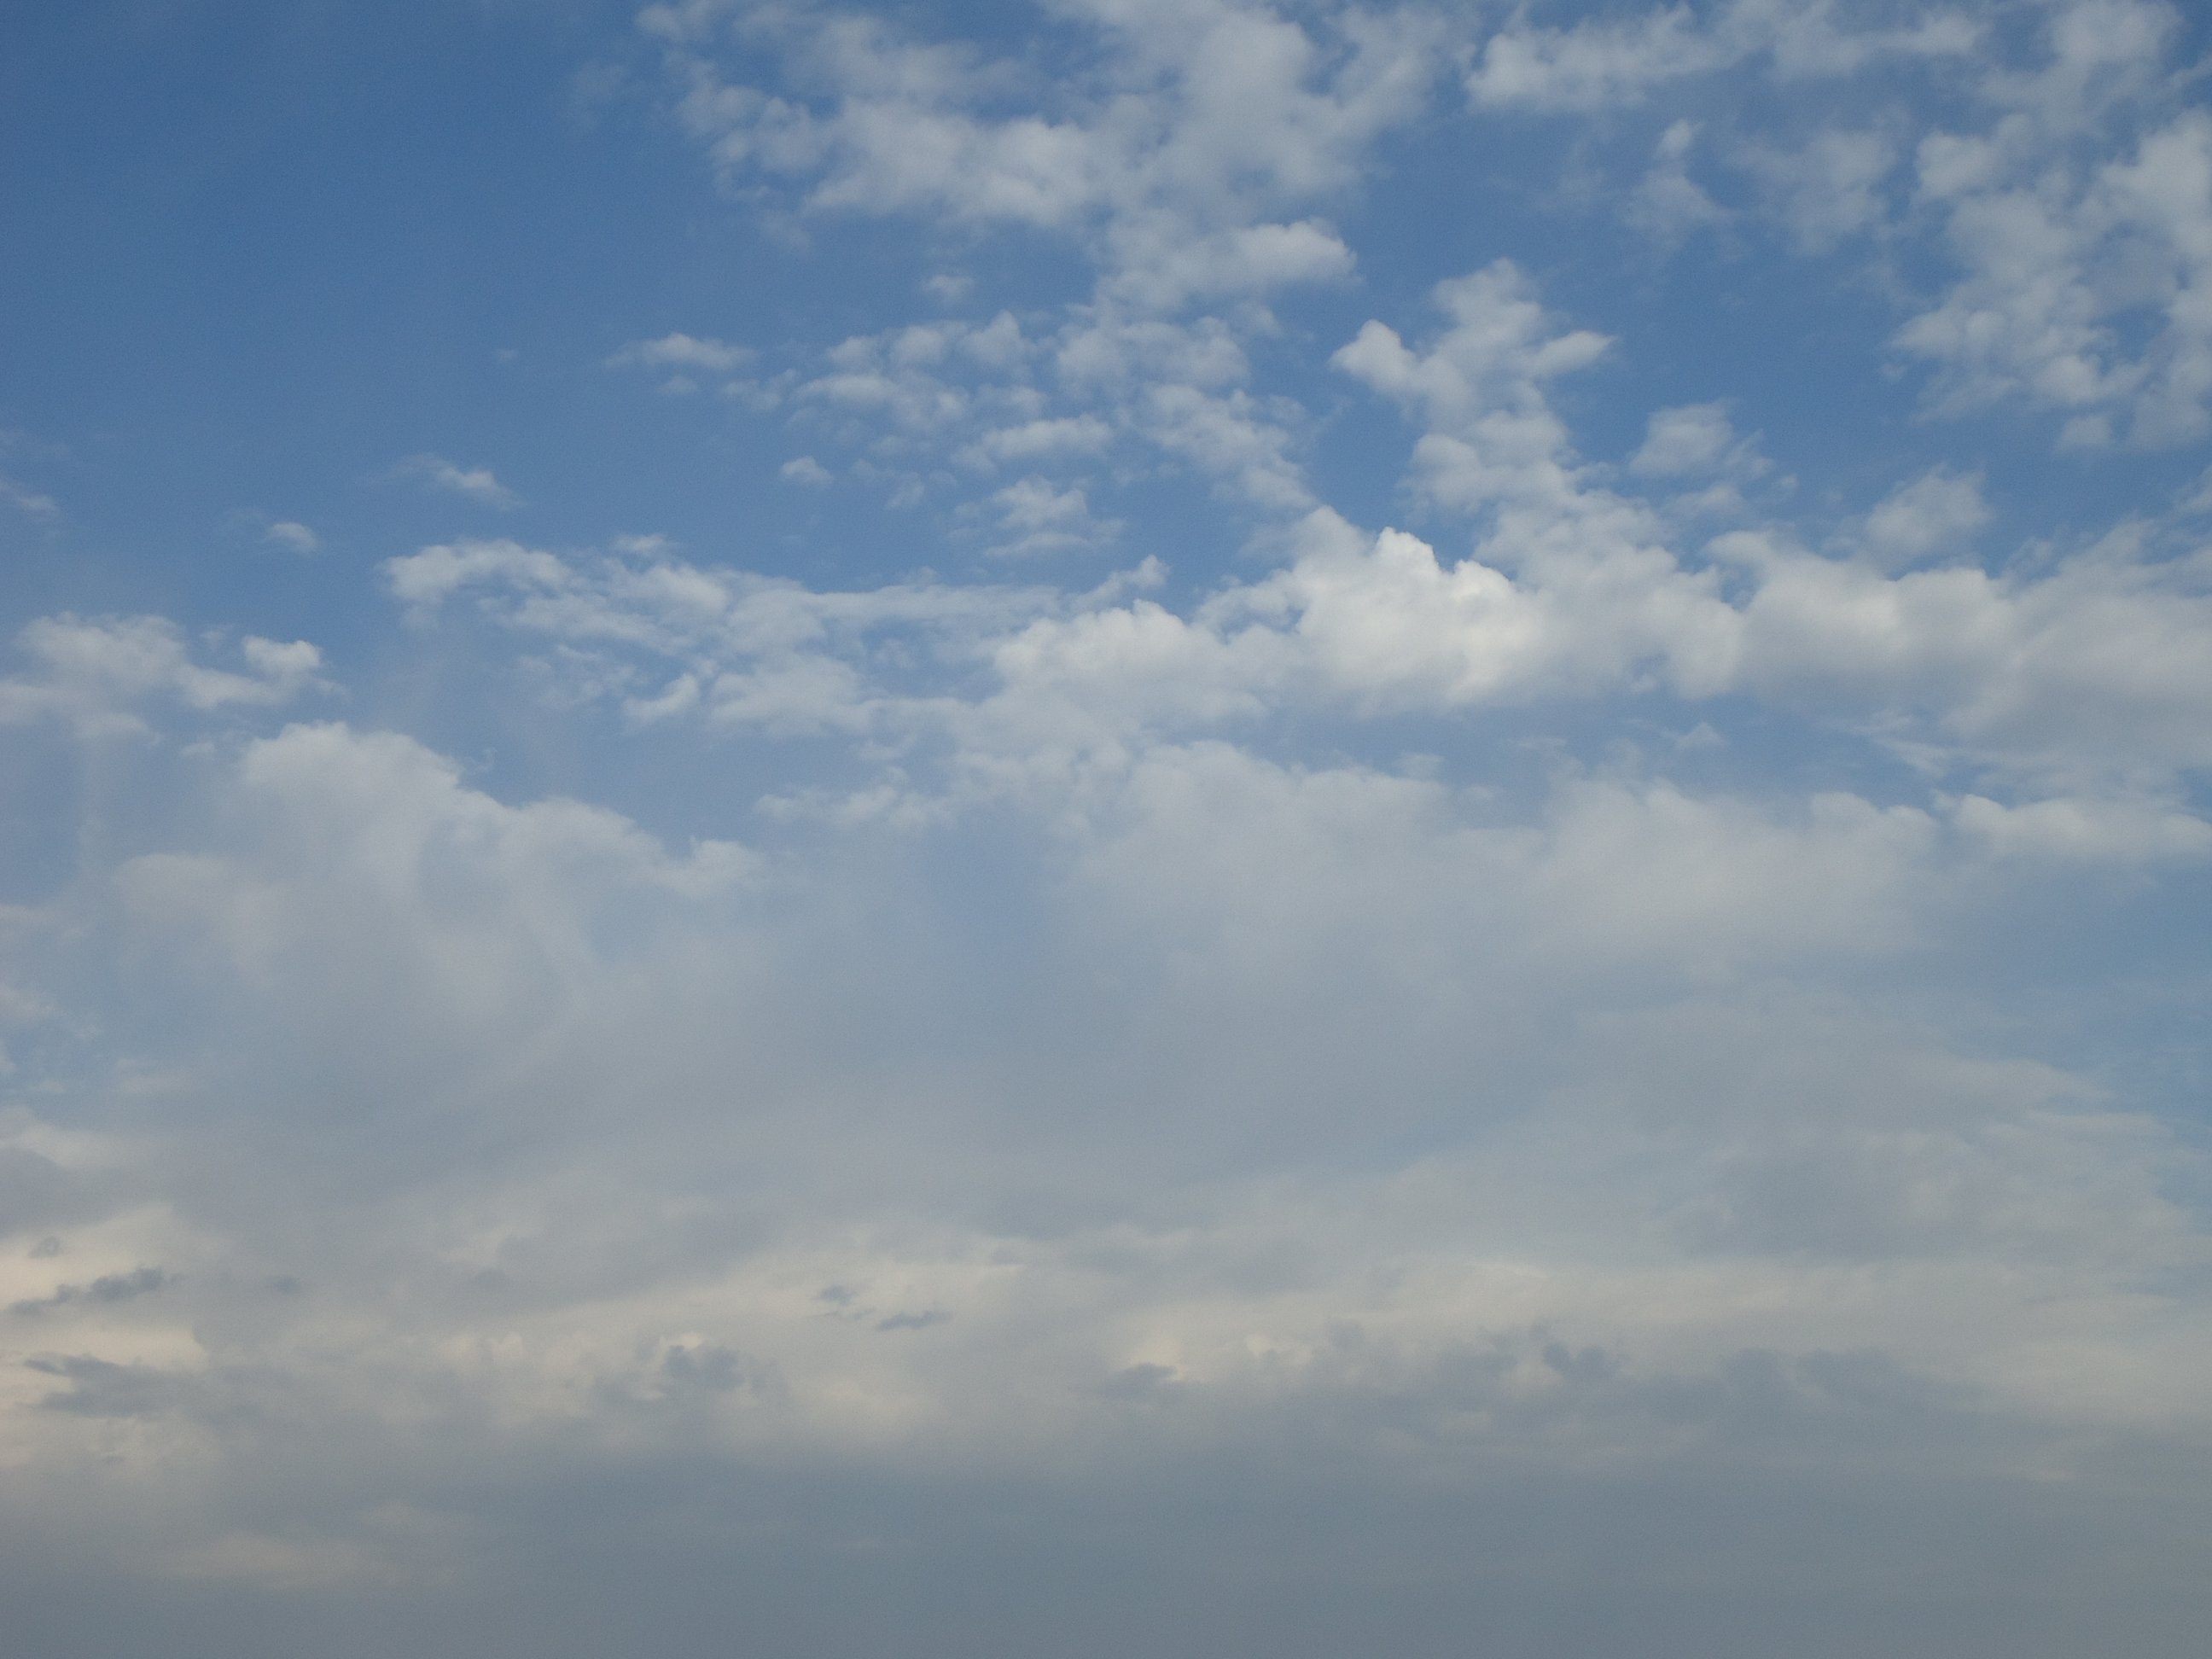 Cloud patterns in partly cloudy sky image - Free stock photo - Public ...